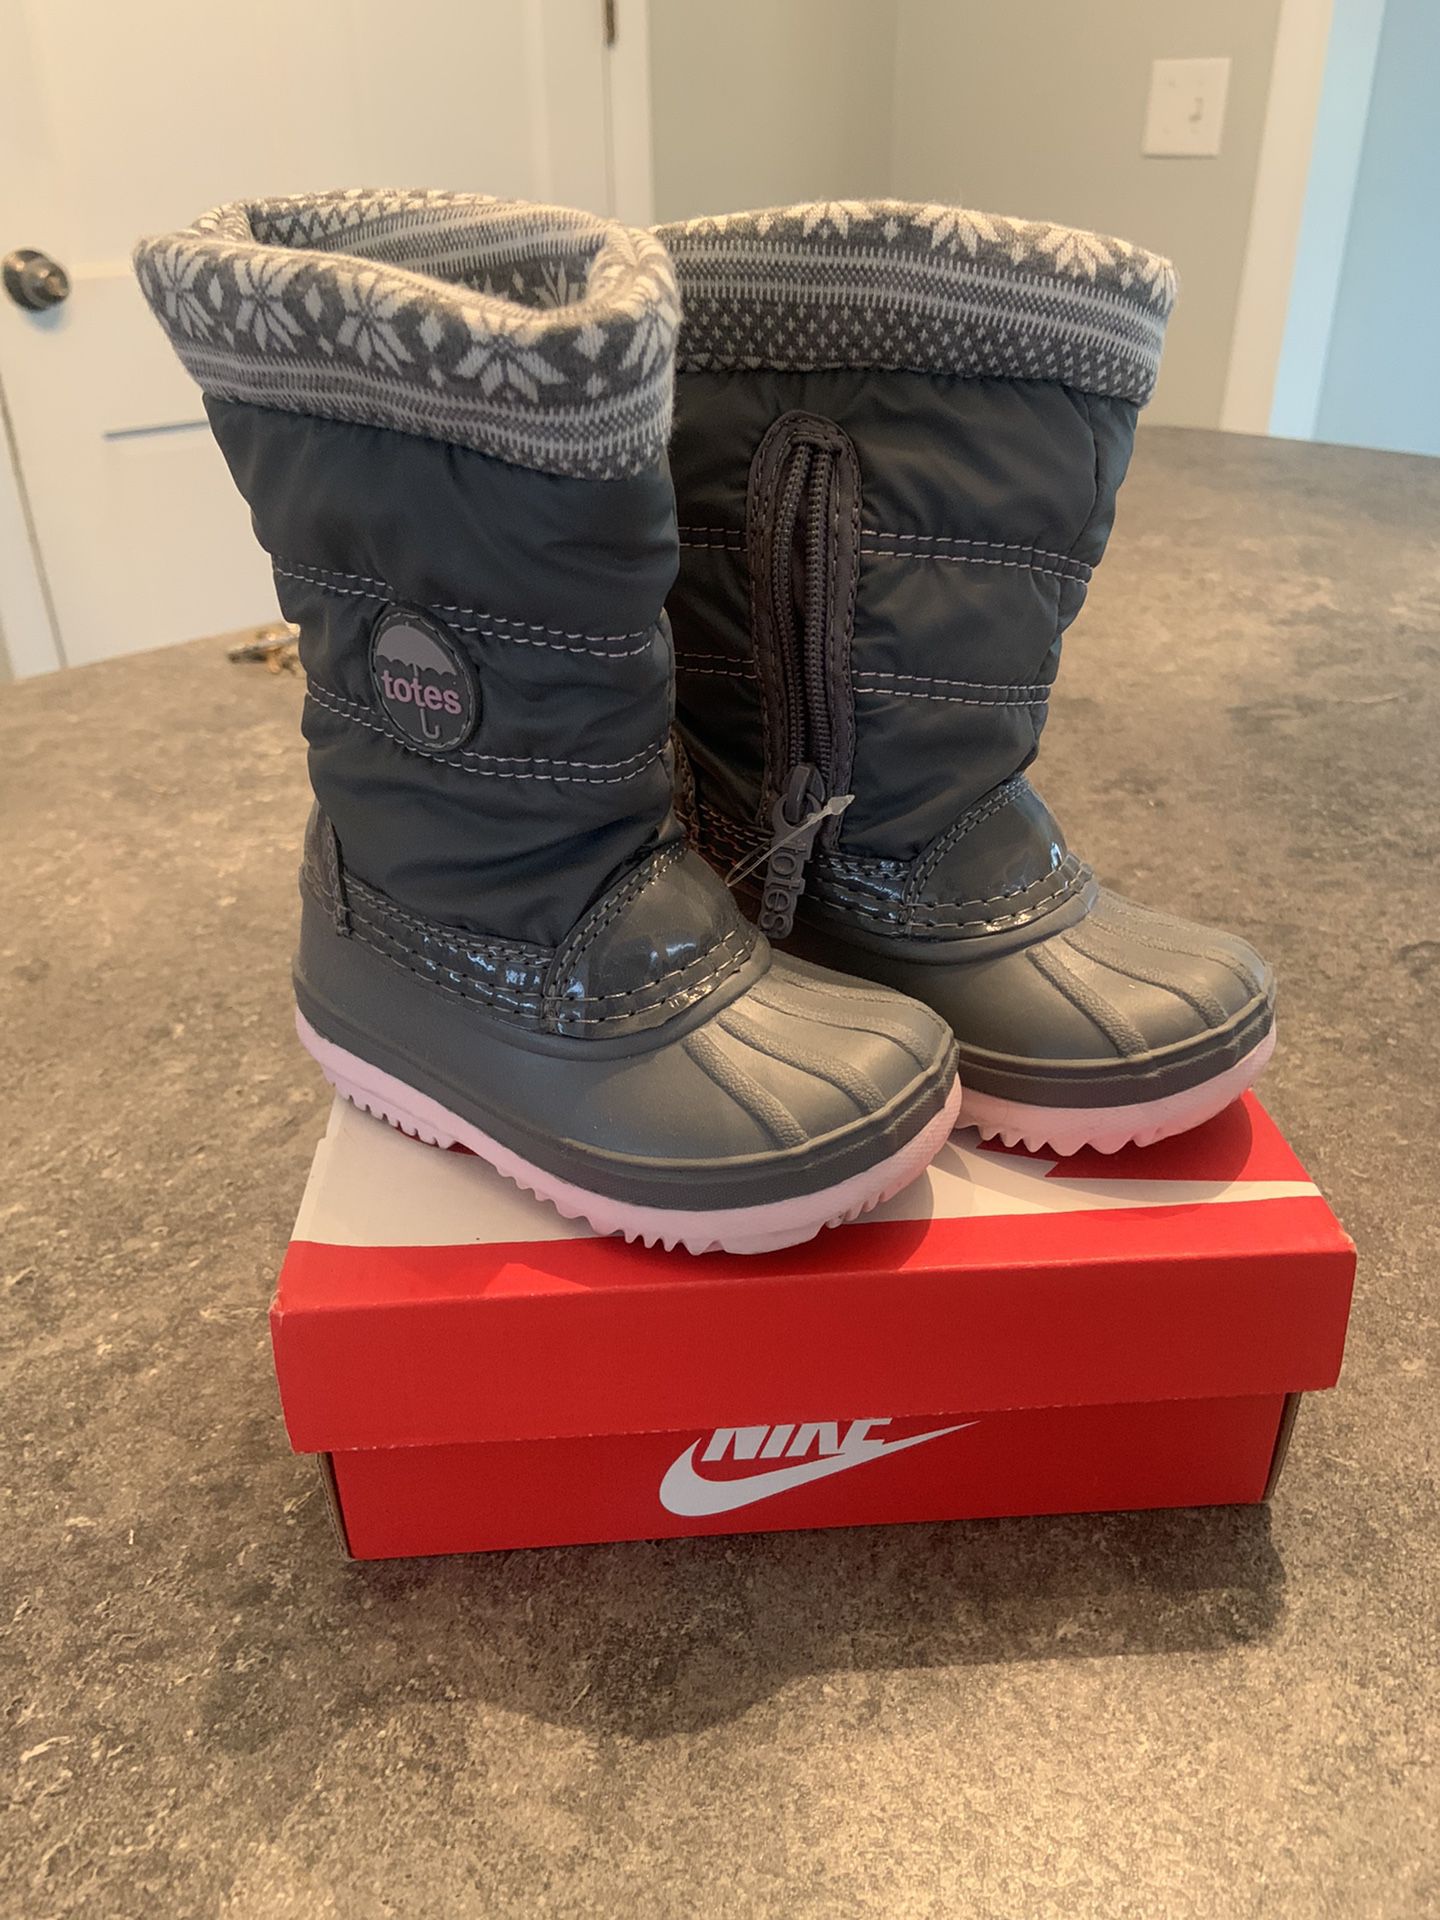 Totes Snow Boots Infant/toddler Size 5